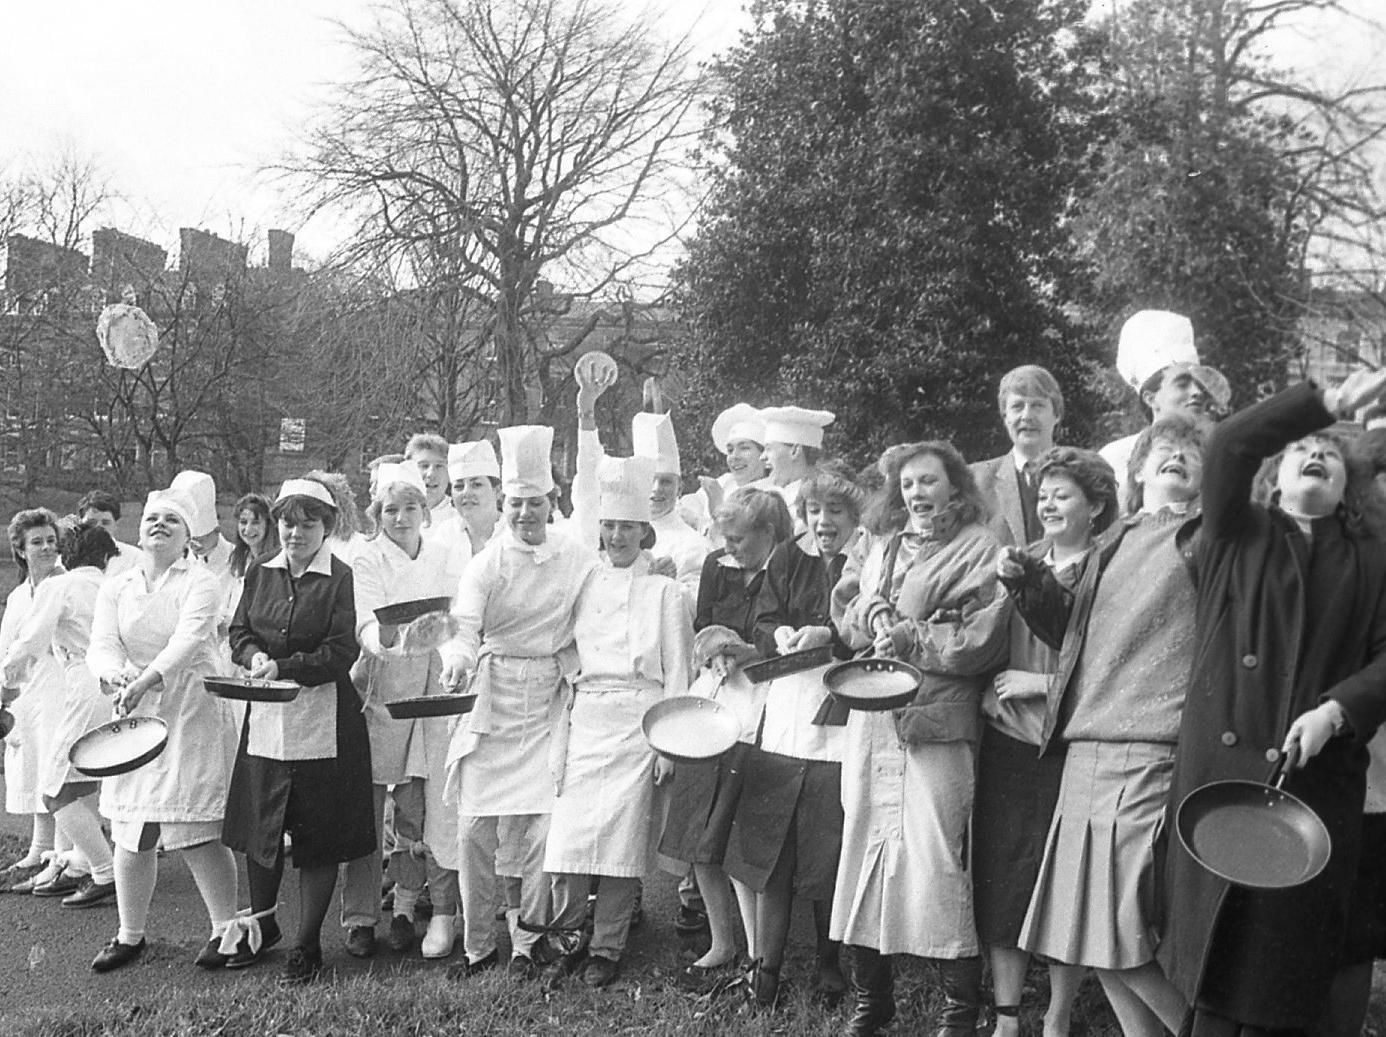 Passers-by watched in amazement as a crowd of pancake-tossing chefs raced across sedate Winckley Square in Preston. It was part of the annual Shrove Tuesday celebrations and 30 catering department students from Tuson College, armed with frying pans and pancakes, took part